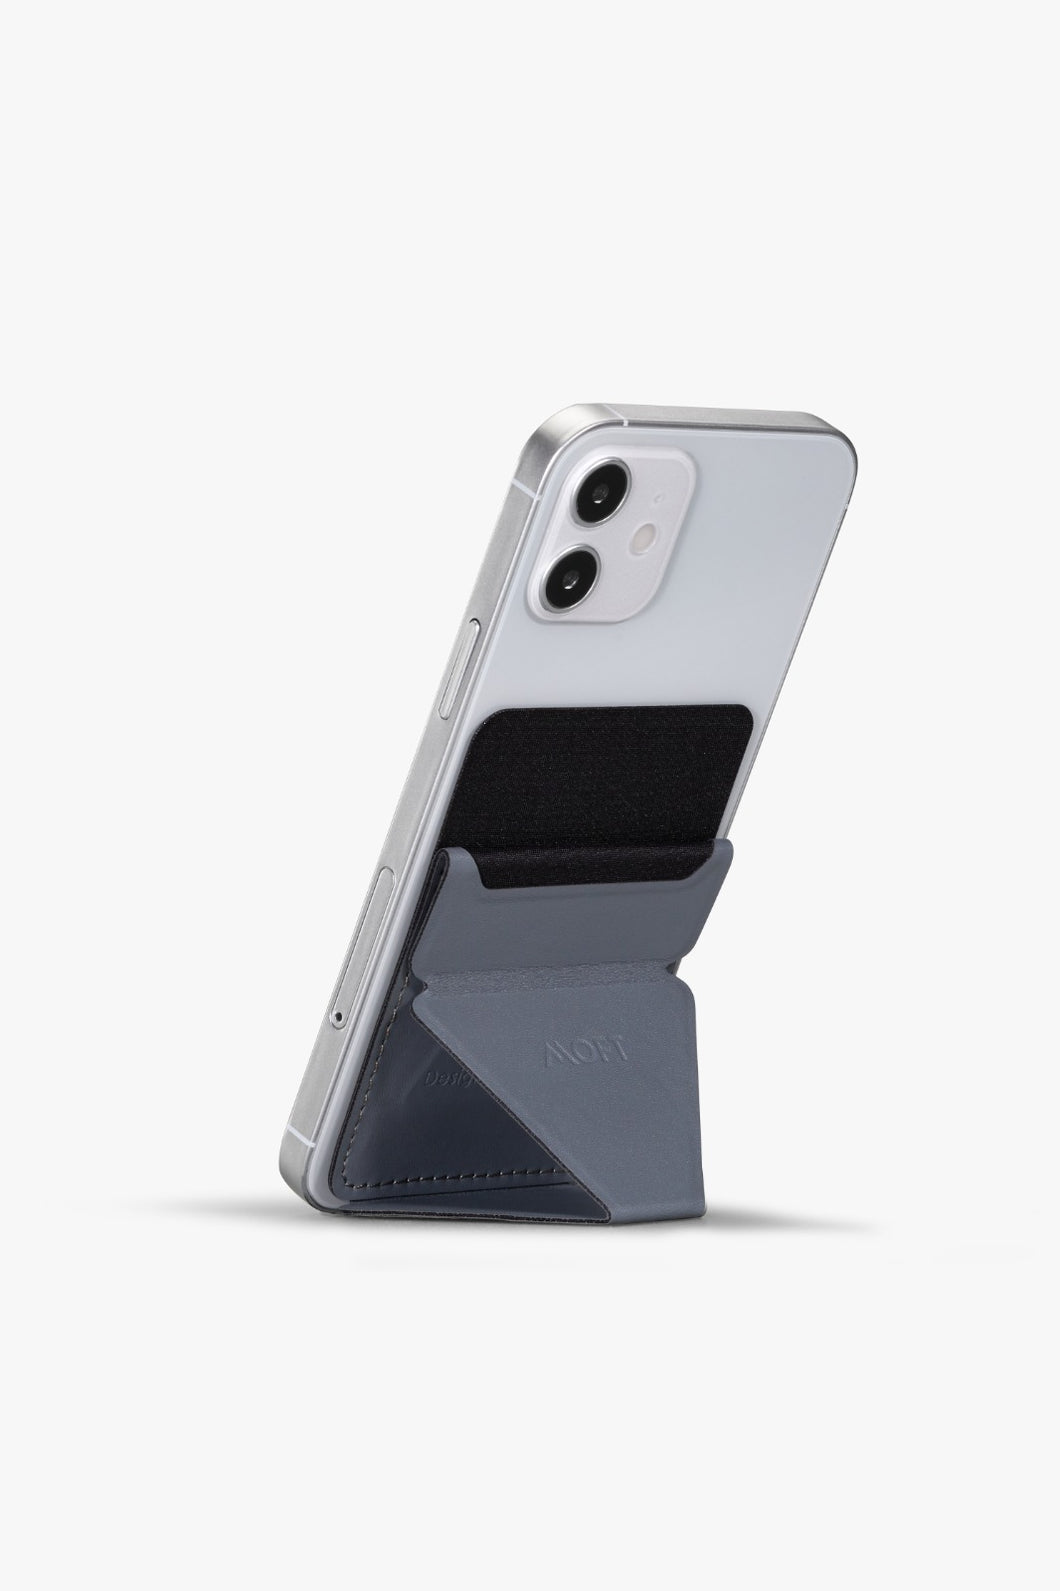 MOFT X Phone Stand with Cardholder (Adhesive - Non-Magnetic)